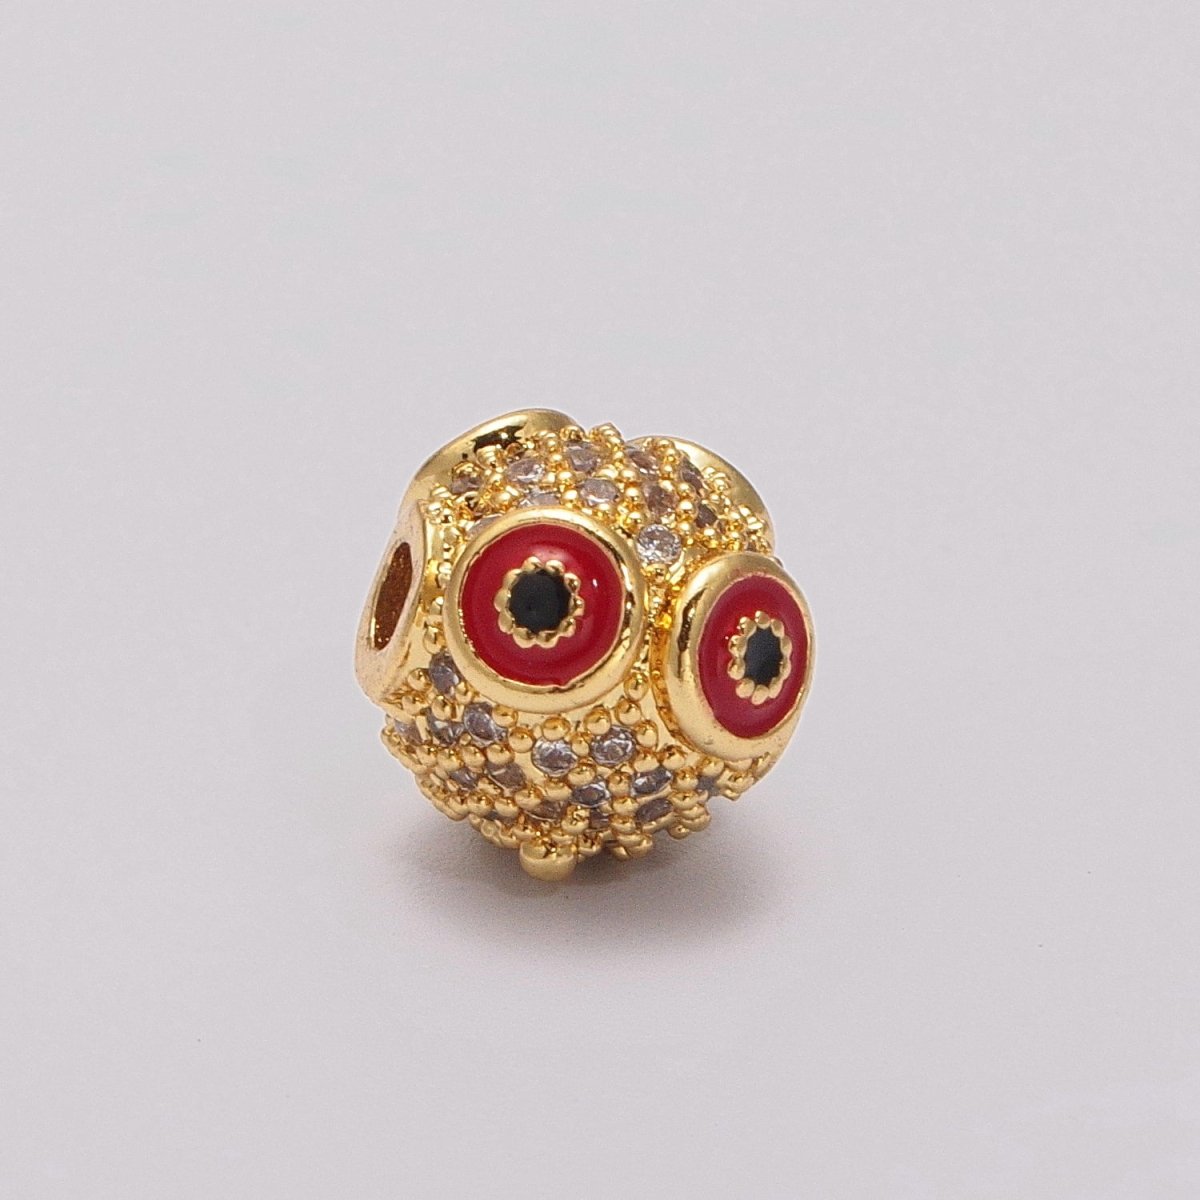 Micro Pave Gold Owl spacer bead Charm for beaded bracelet Making Supply Owl Head Bead 9mm with small hole B-641 to B-644 - DLUXCA